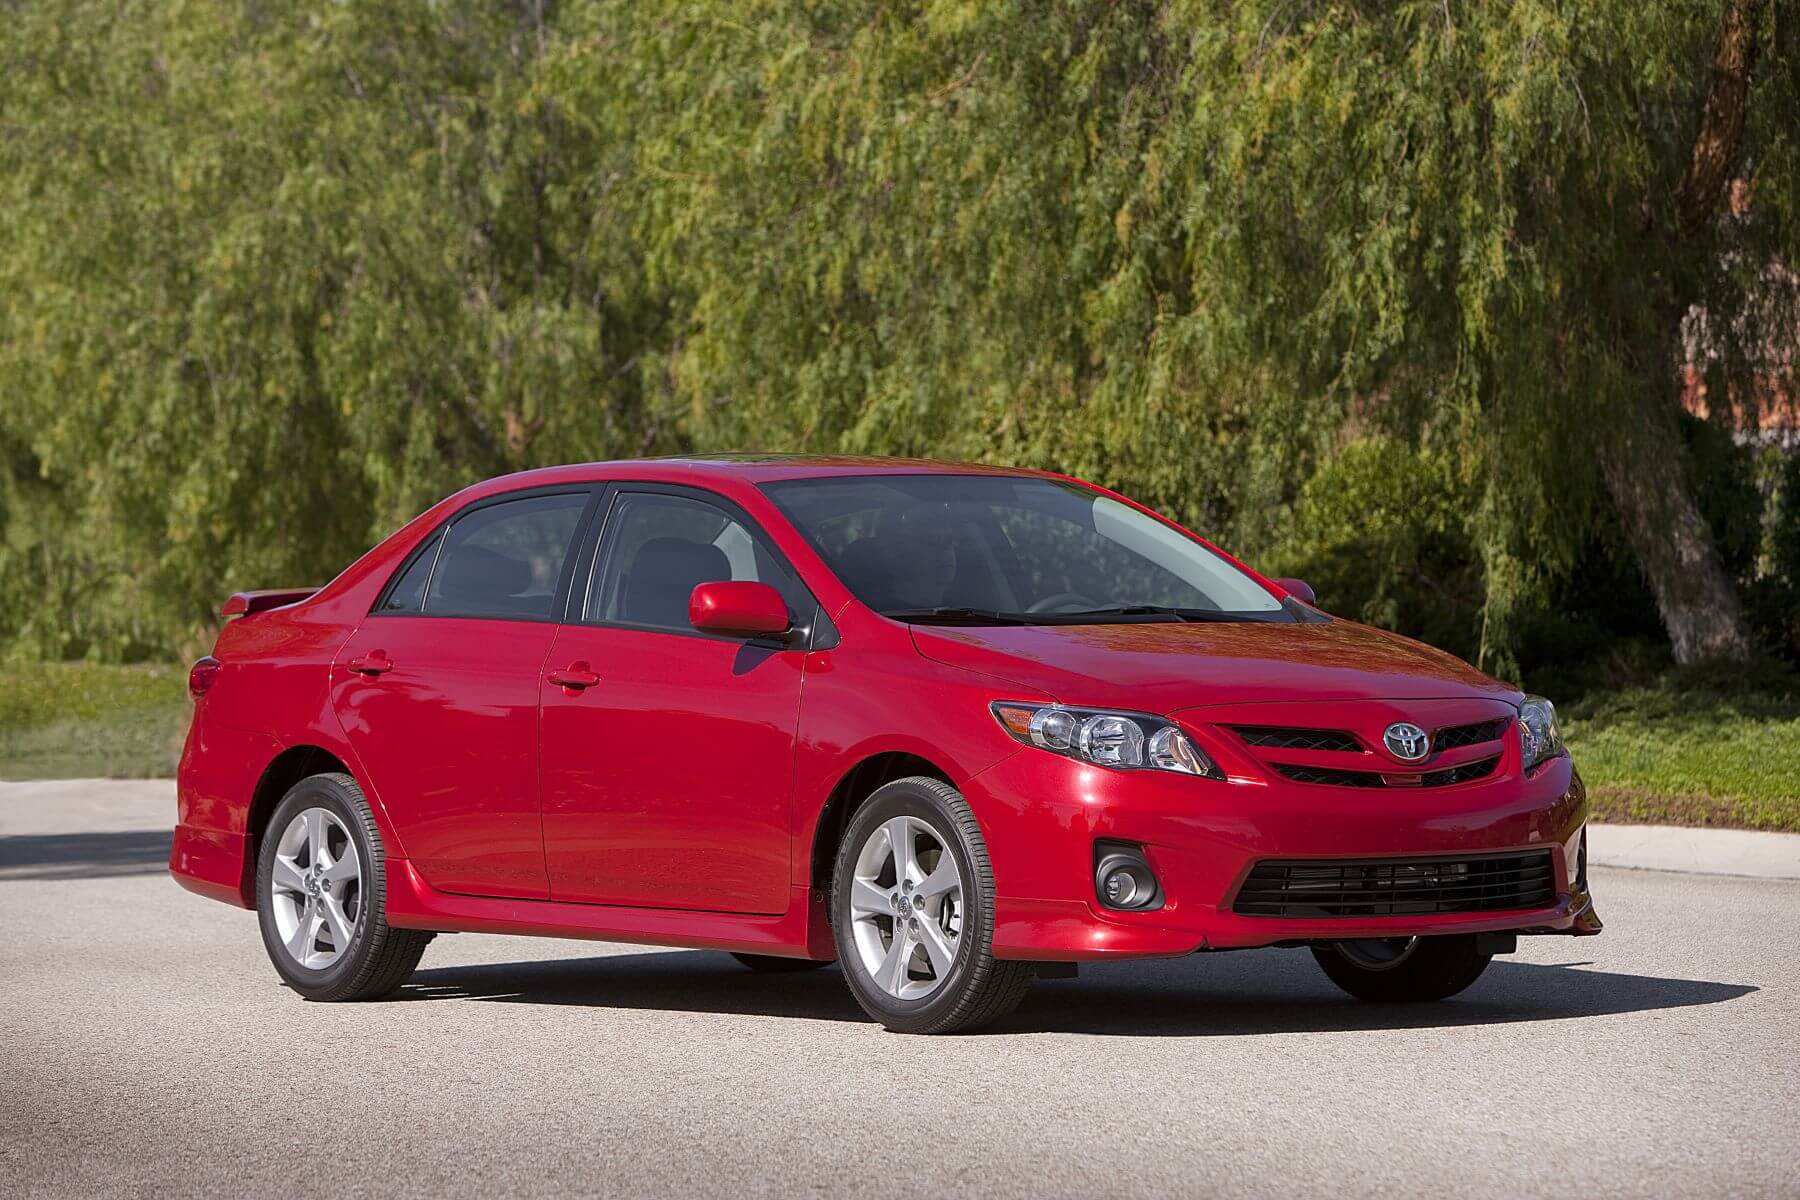 The 10th generation of the Toyota Corolla compact sedan, spanning the 2009 to 2013 model years